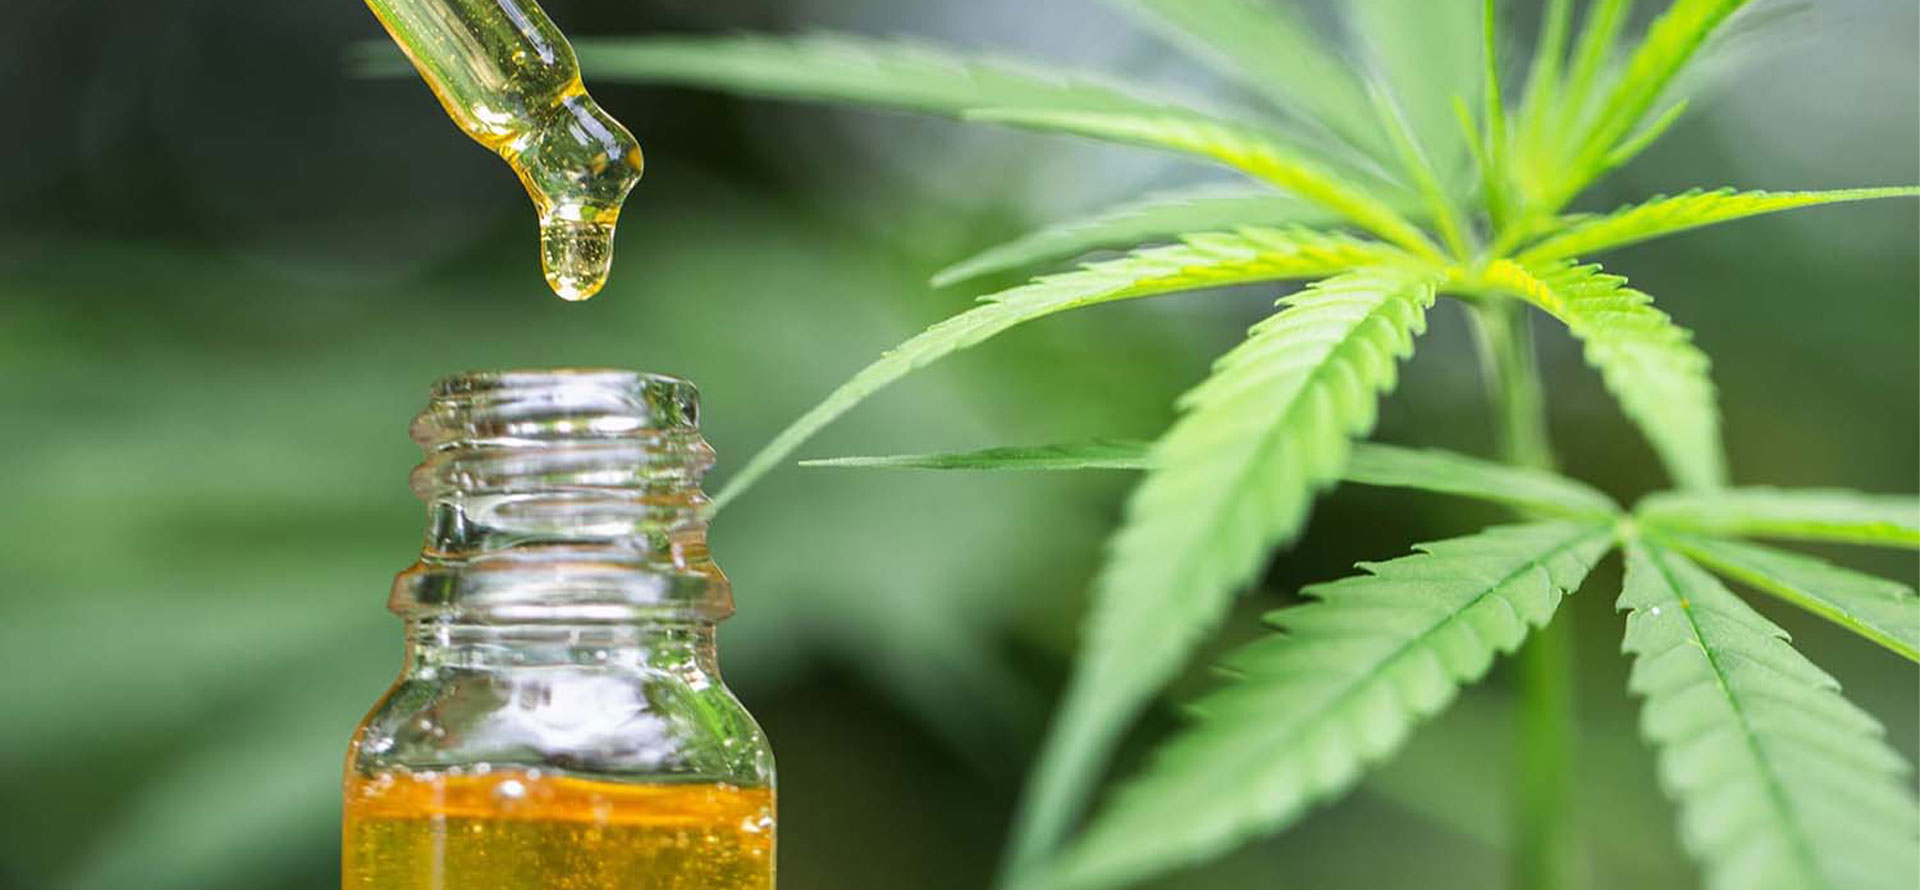 CBC OIL FOR PAIN AND INFLAMMATION - Cbd|Oil|Benefits|Cbc|Effects|Pain|Study|Health|Thc|Products|Cannabinoids|Studies|Research|Anxiety|Cannabis|Symptoms|Evidence|People|System|Disease|Treatment|Inflammation|Hemp|Body|Receptors|Disorders|Brain|Plant|Cells|Side|Effect|Blood|Patients|Cancer|Product|Skin|Marijuana|Properties|Cannabidiol|Cannabinoid|Cbd Oil|Cbd Products|Cbc Oil|Side Effects|Endocannabinoid System|Chronic Pain|Multiple Sclerosis|Pain Relief|Cannabis Plant|Cbd Oil Benefits|Blood Pressure|Health Benefits|High Blood Pressure|Anti-Inflammatory Properties|Neuropathic Pain|Animal Studies|Hemp Plant|Hemp Oil|Anxiety Disorders|Cbd Product|Immune System|Clinical Trials|Cbd Gummies|Nerve Cells|Nervous System|Entourage Effect|Hemp Seed Oil|United States|Cbd Oils|Drug Administration